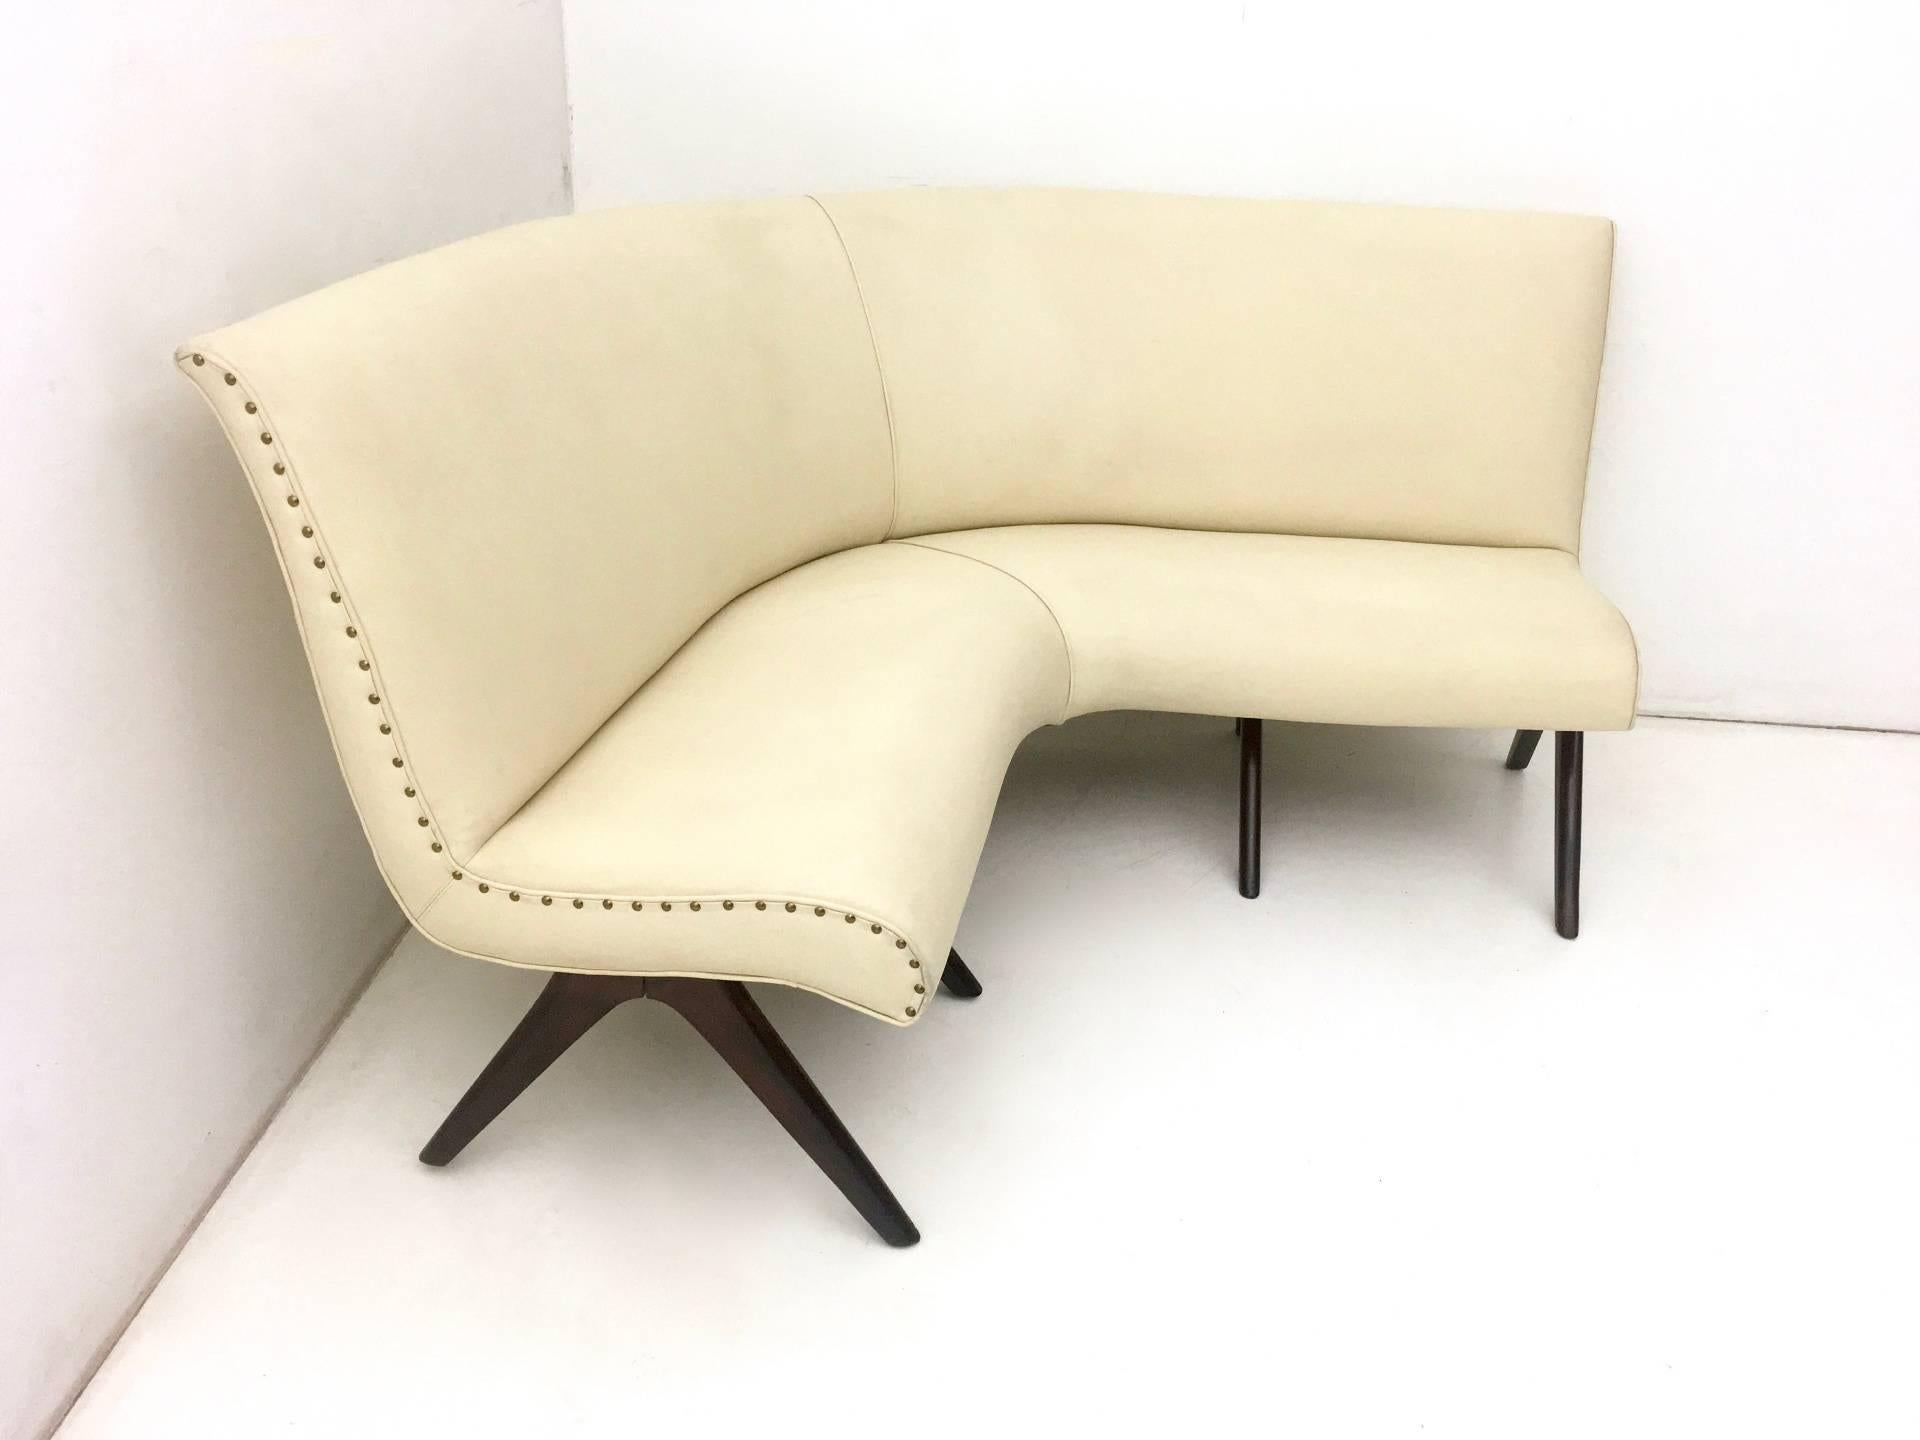 Mid-Century Modern Vintage Corner Sofa with Wooden Structure and Beige Skai Upholstery, Italy